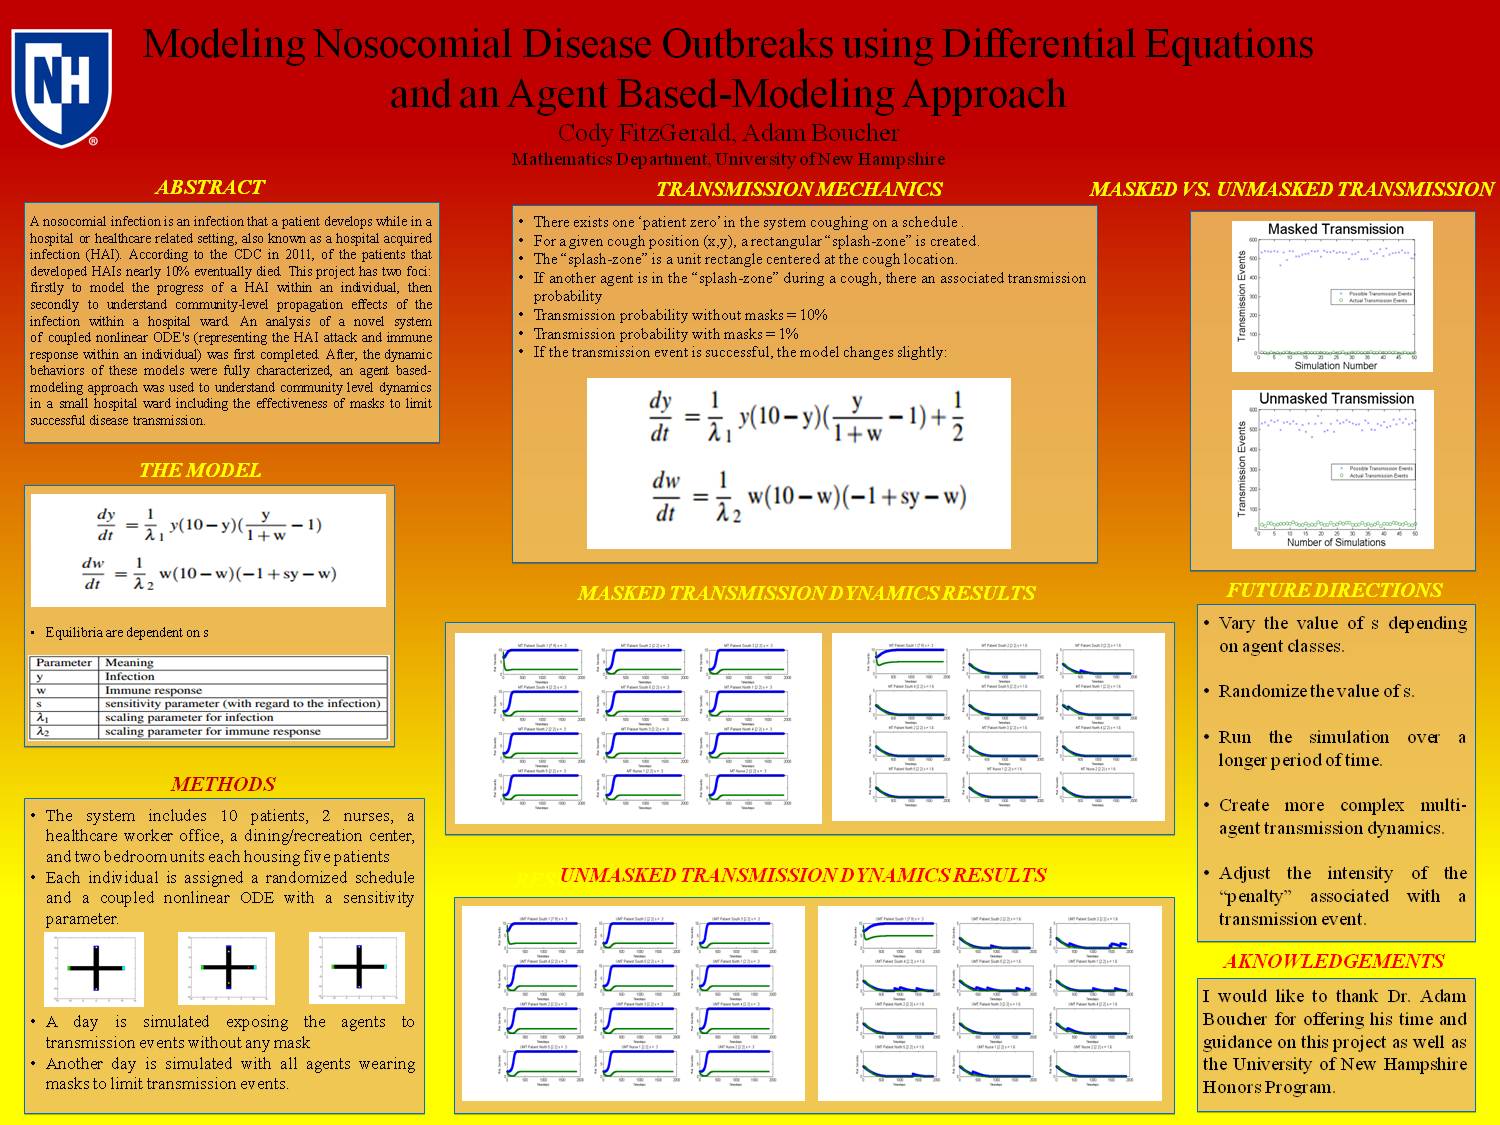  Modeling Nosocomial Disease Outbreaks Using Differential Equations And An Agent Based-Modeling Approach by cel92